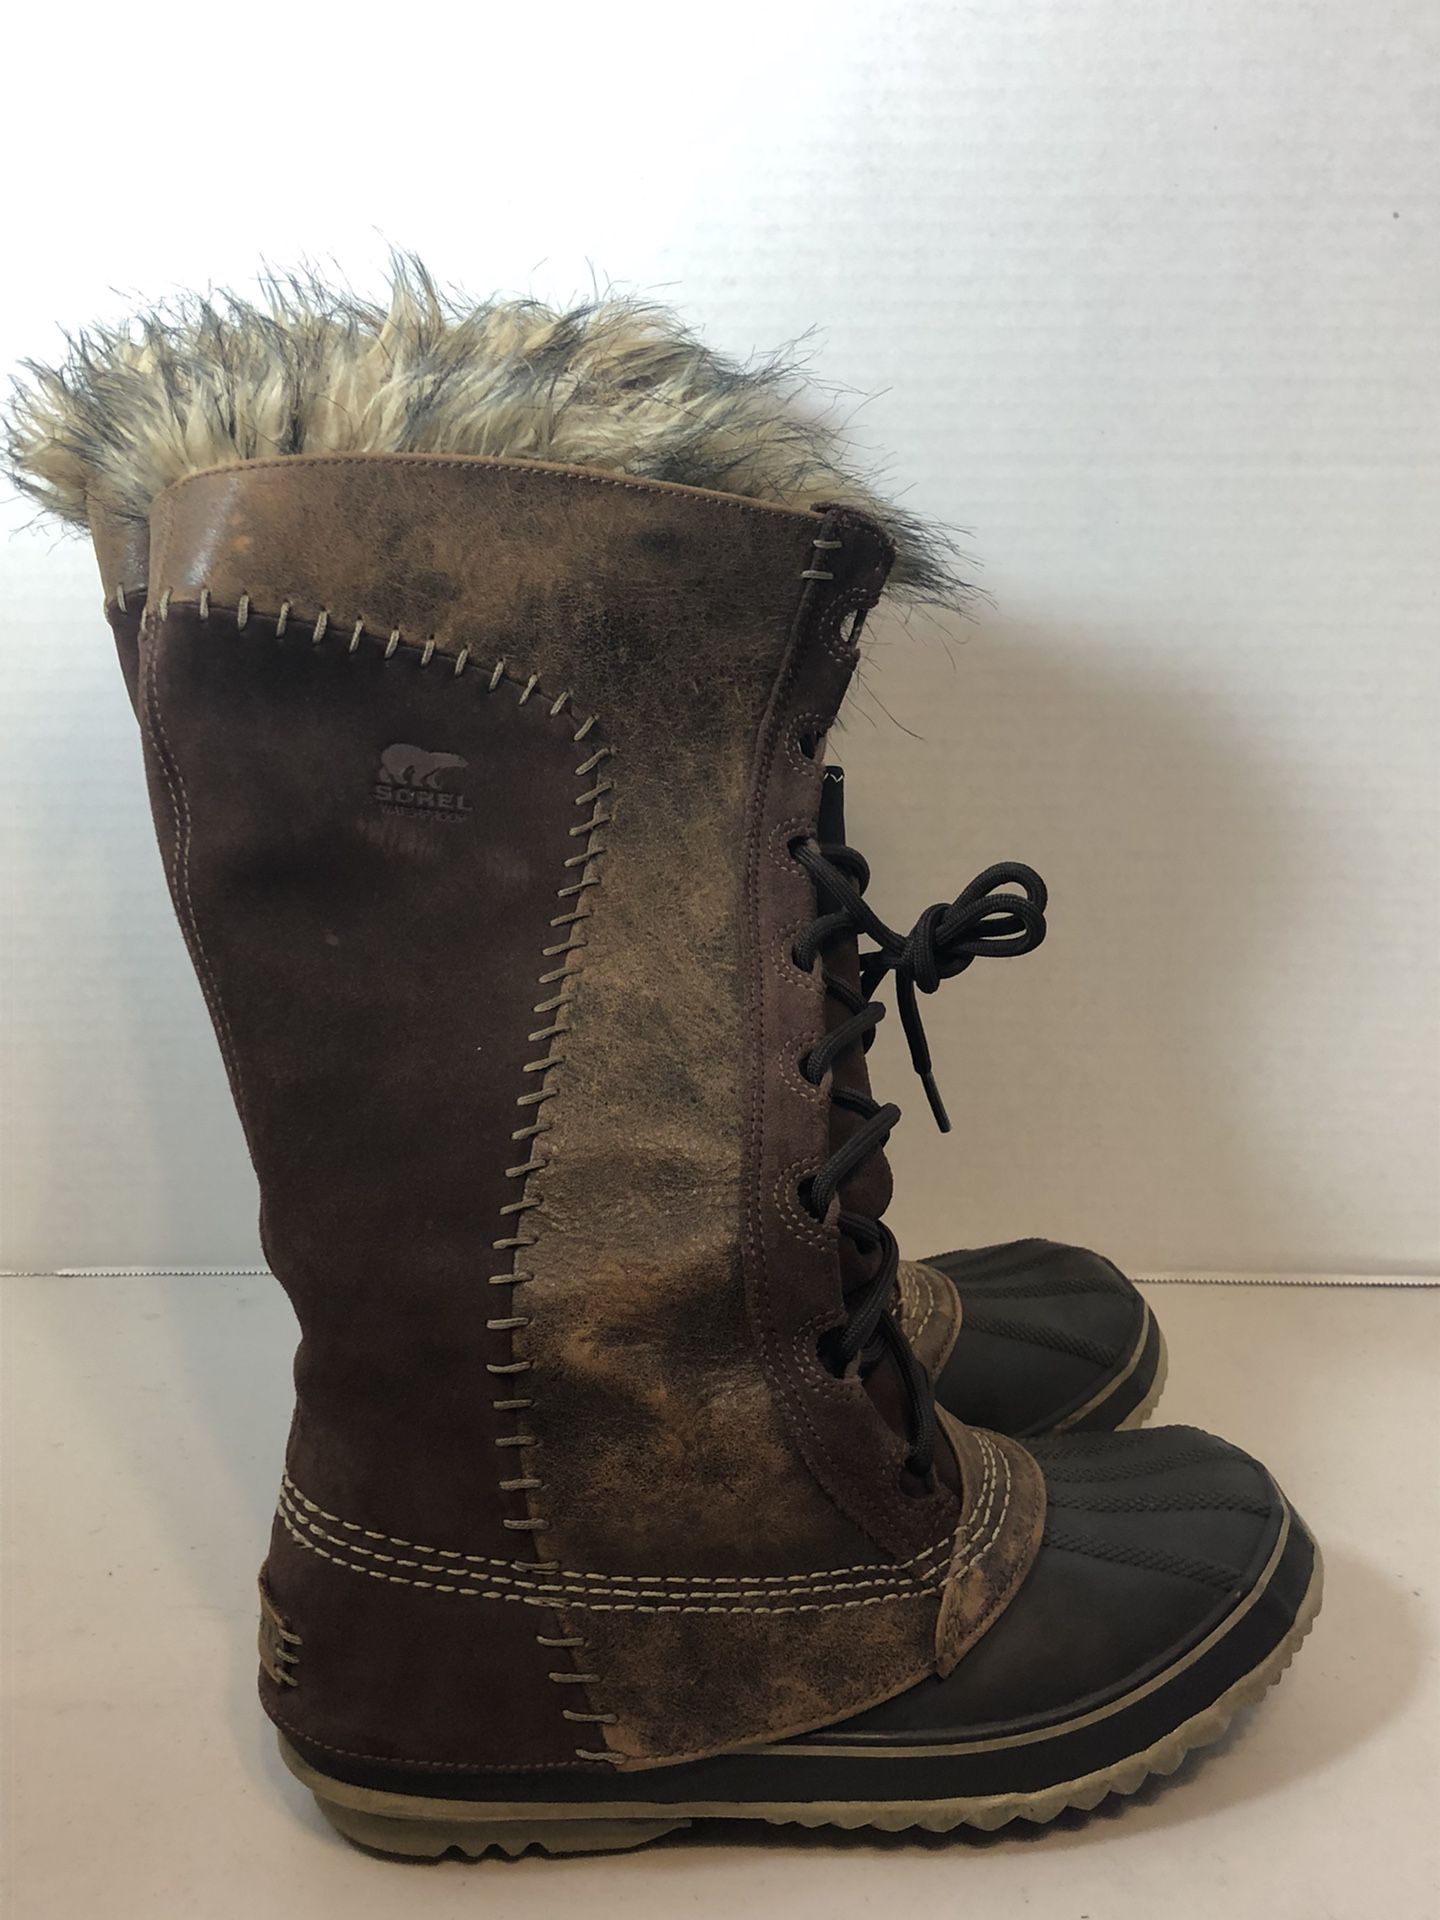 Sorel Cate The Great Women’s Winter Boots Size 7